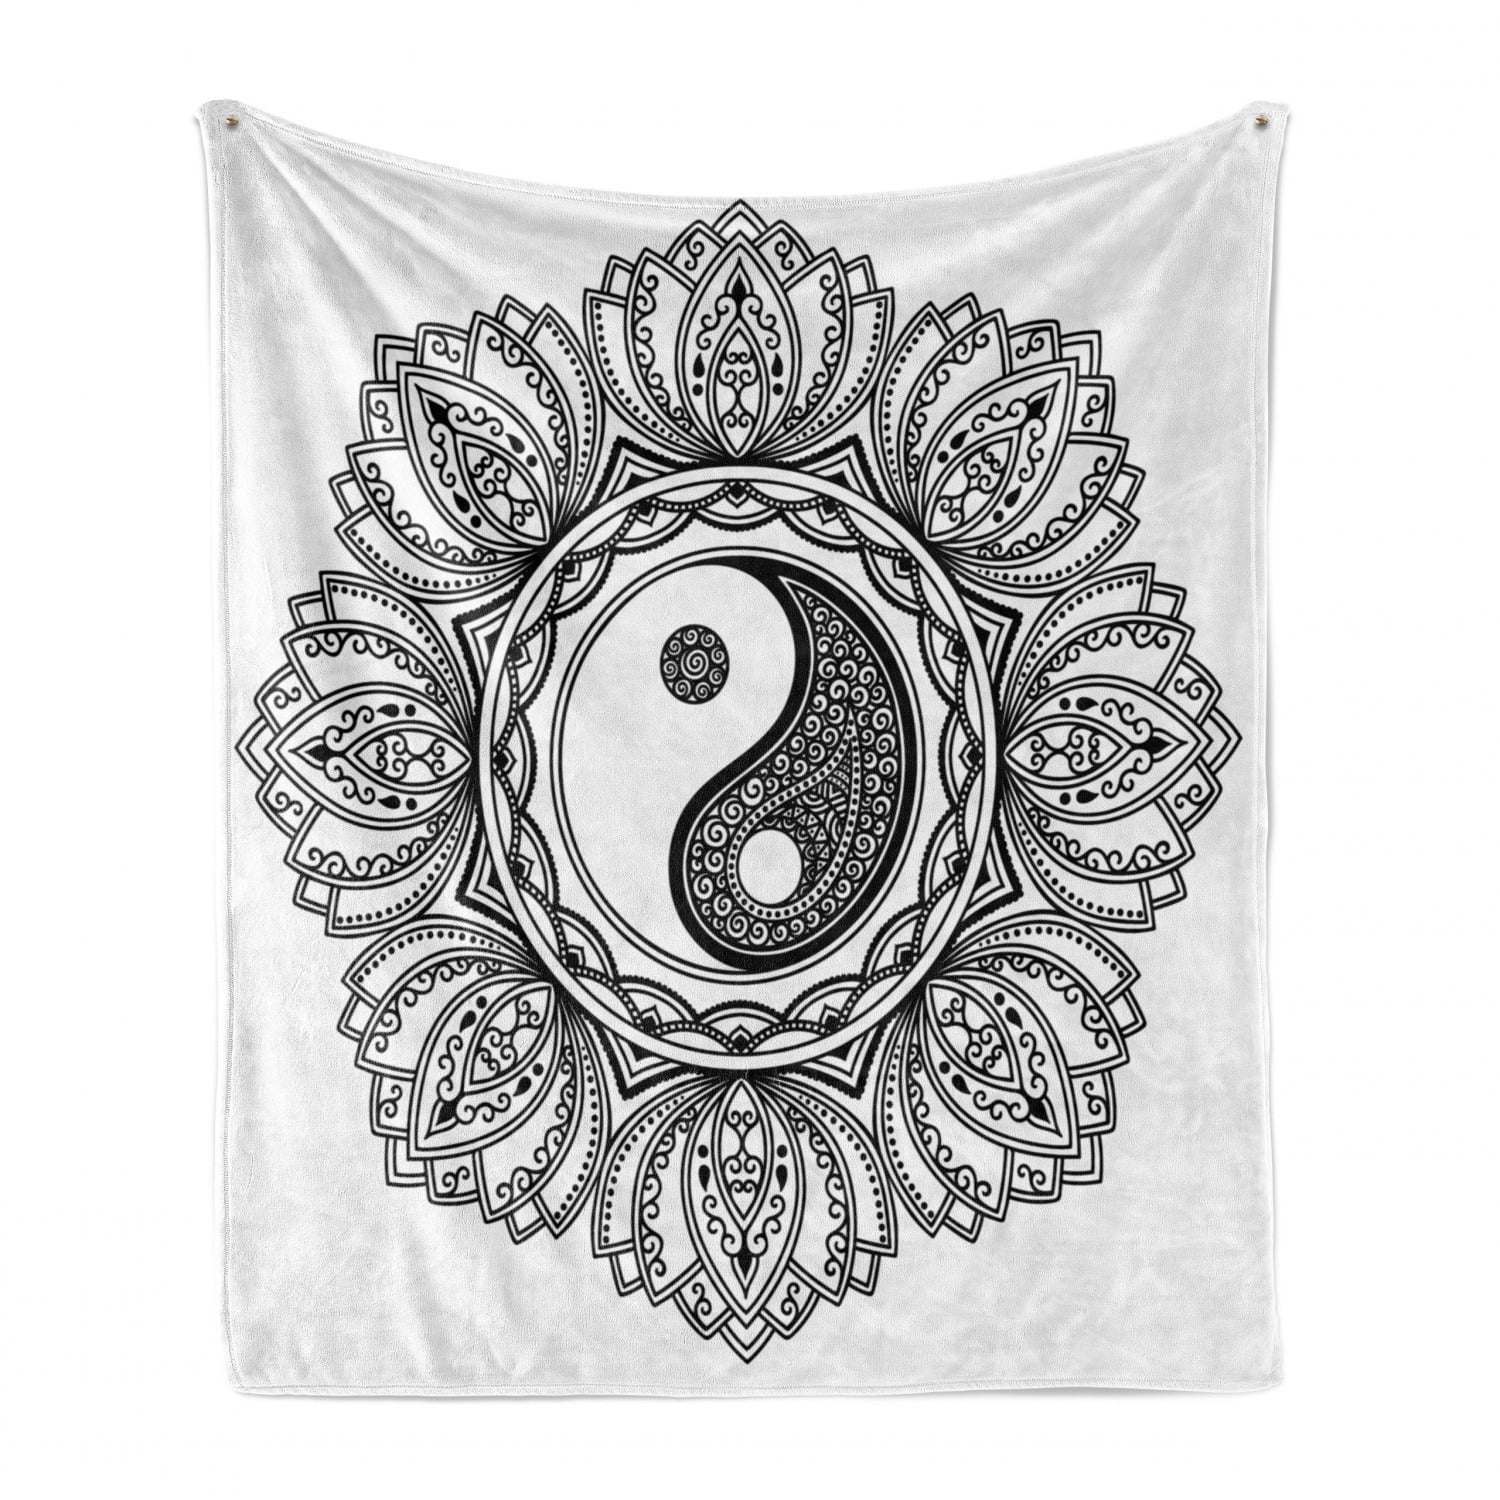 Traditional Mystical Yin Yang with Tao Mandala Pattern Floral Style Design Ambesonne Ying Yang Soft Flannel Fleece Throw Blanket Cozy Plush for Indoor and Outdoor Use Pink 50 x 70 